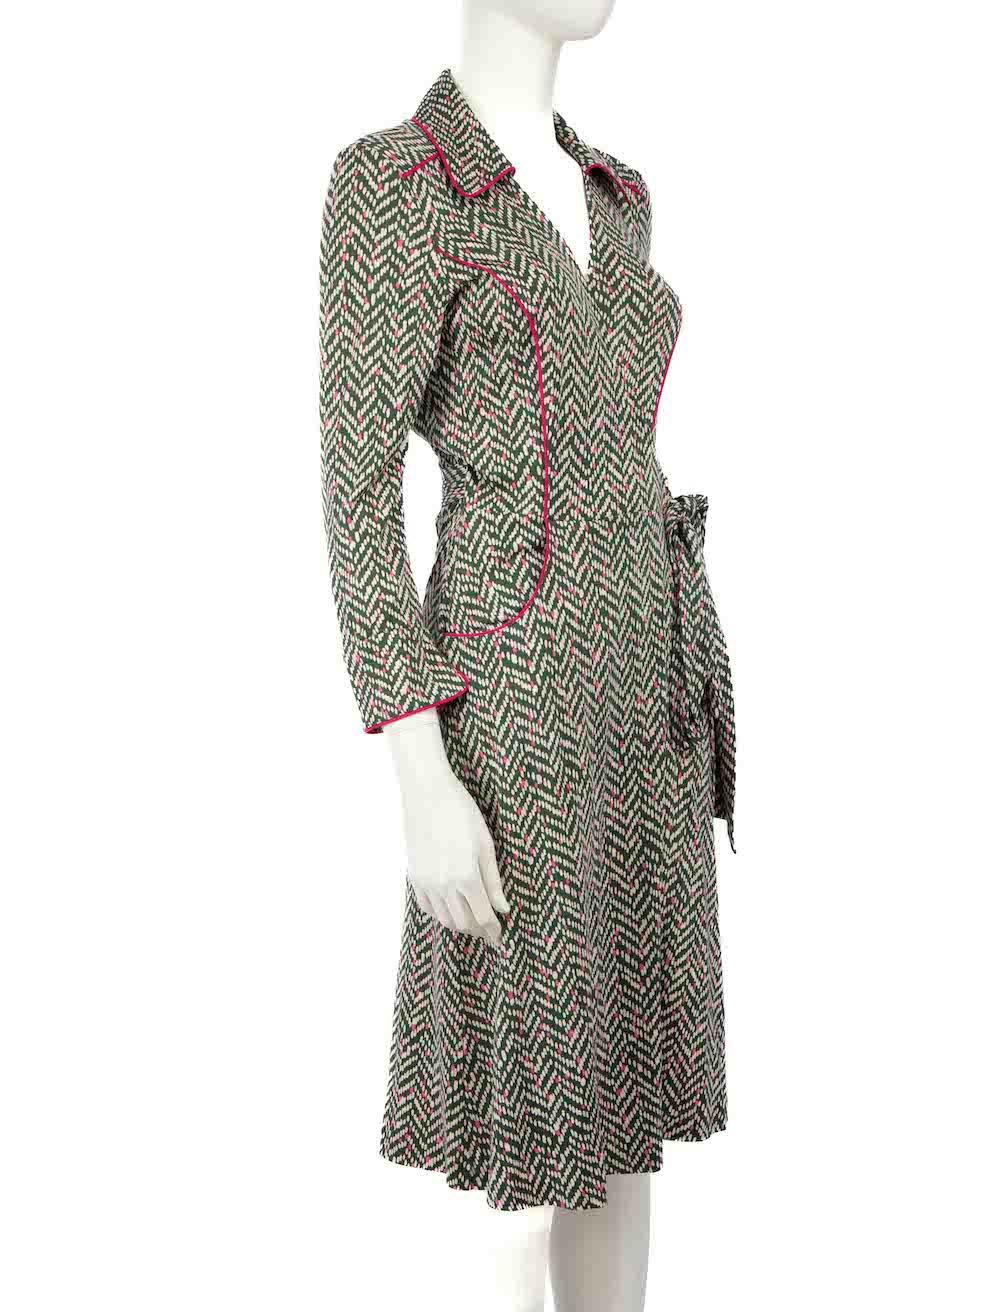 CONDITION is Very good. Hardly any visible wear to dress is evident on this used Diane von Furstenberg designer resale item.
 
 
 
 Details
 
 
 Green
 
 Silk
 
 Wrap dress
 
 Midi length
 
 Dotted pattern
 
 V neckline
 
 Mid sleeves
 
 2x Front